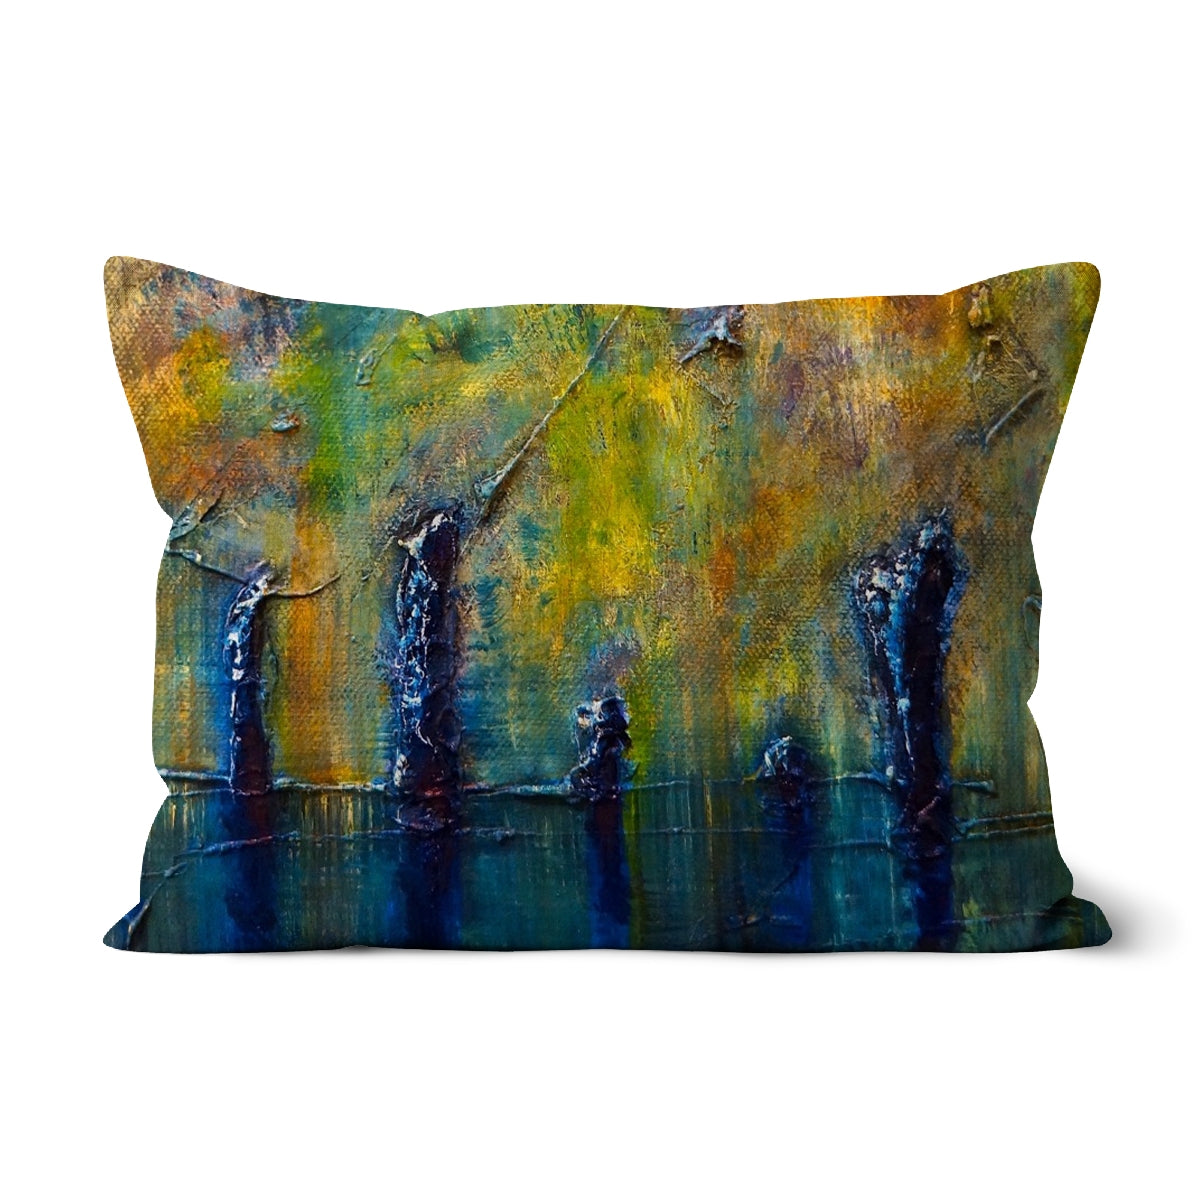 Stenness Moonlight Orkney Art Gifts Cushion-Cushions-Orkney Art Gallery-Linen-19"x13"-Paintings, Prints, Homeware, Art Gifts From Scotland By Scottish Artist Kevin Hunter